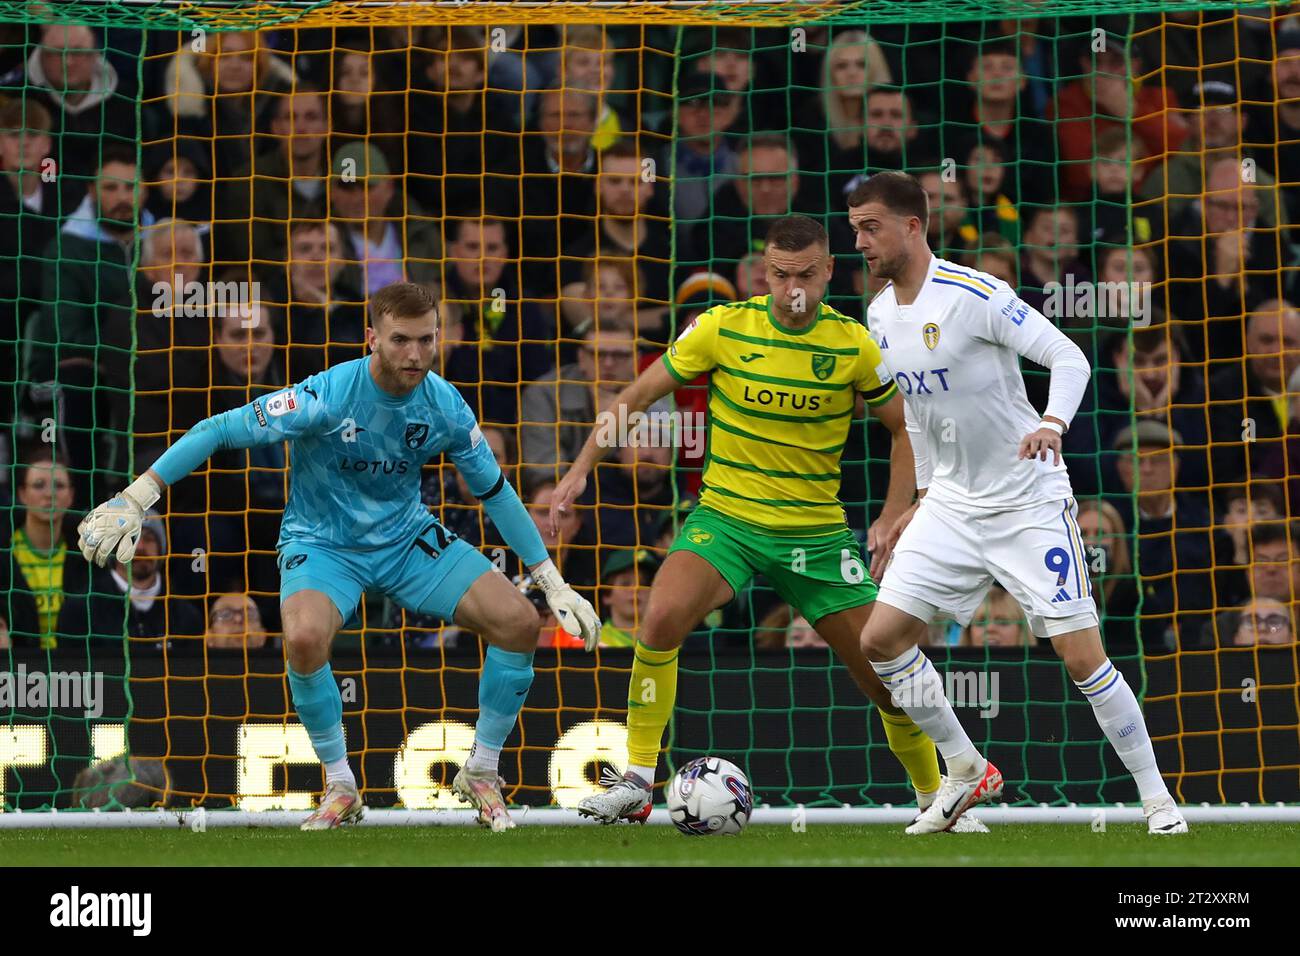 Patrick Bamford of Leeds United, Ben Gibson and George Long of Norwich City - Norwich City v Leeds United, Sky Bet Championship, Carrow Road, Norwich, UK - 21st October 2023 Editorial Use Only - DataCo restrictions apply Stock Photo